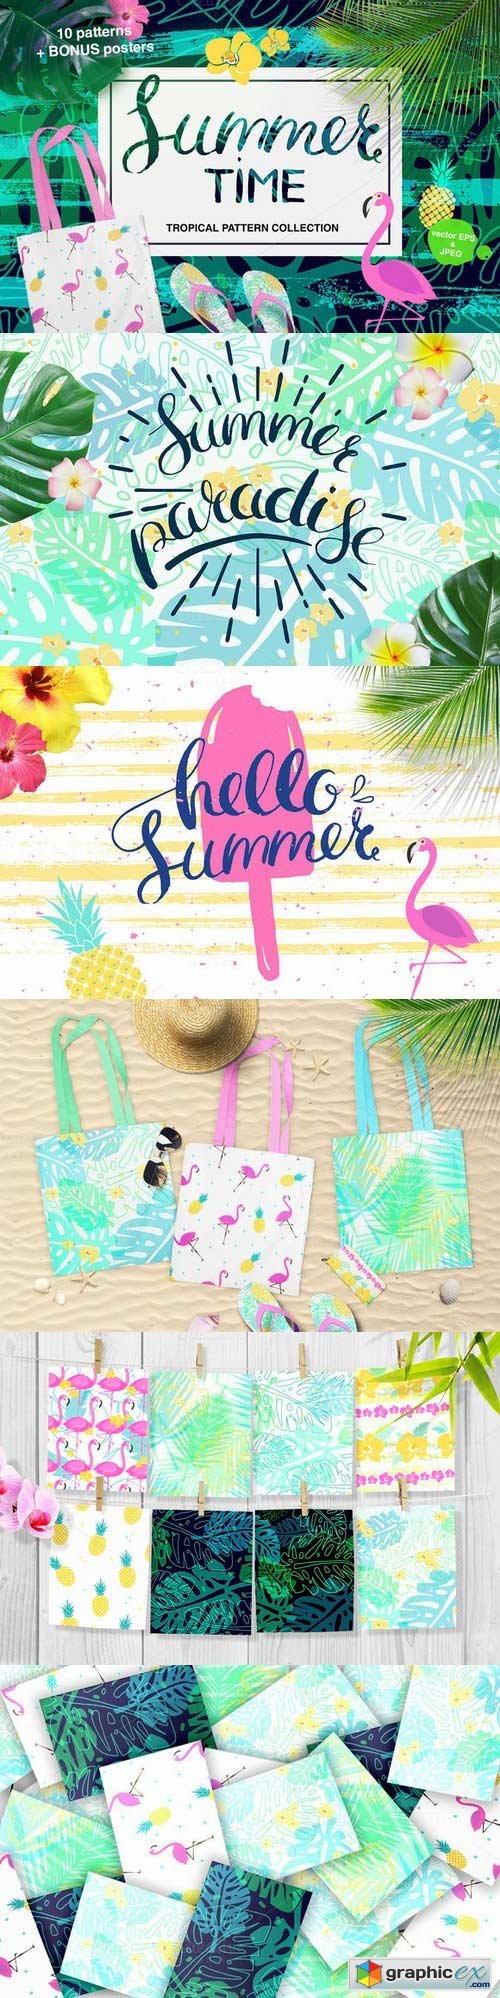 Summertime: set of tropical patterns